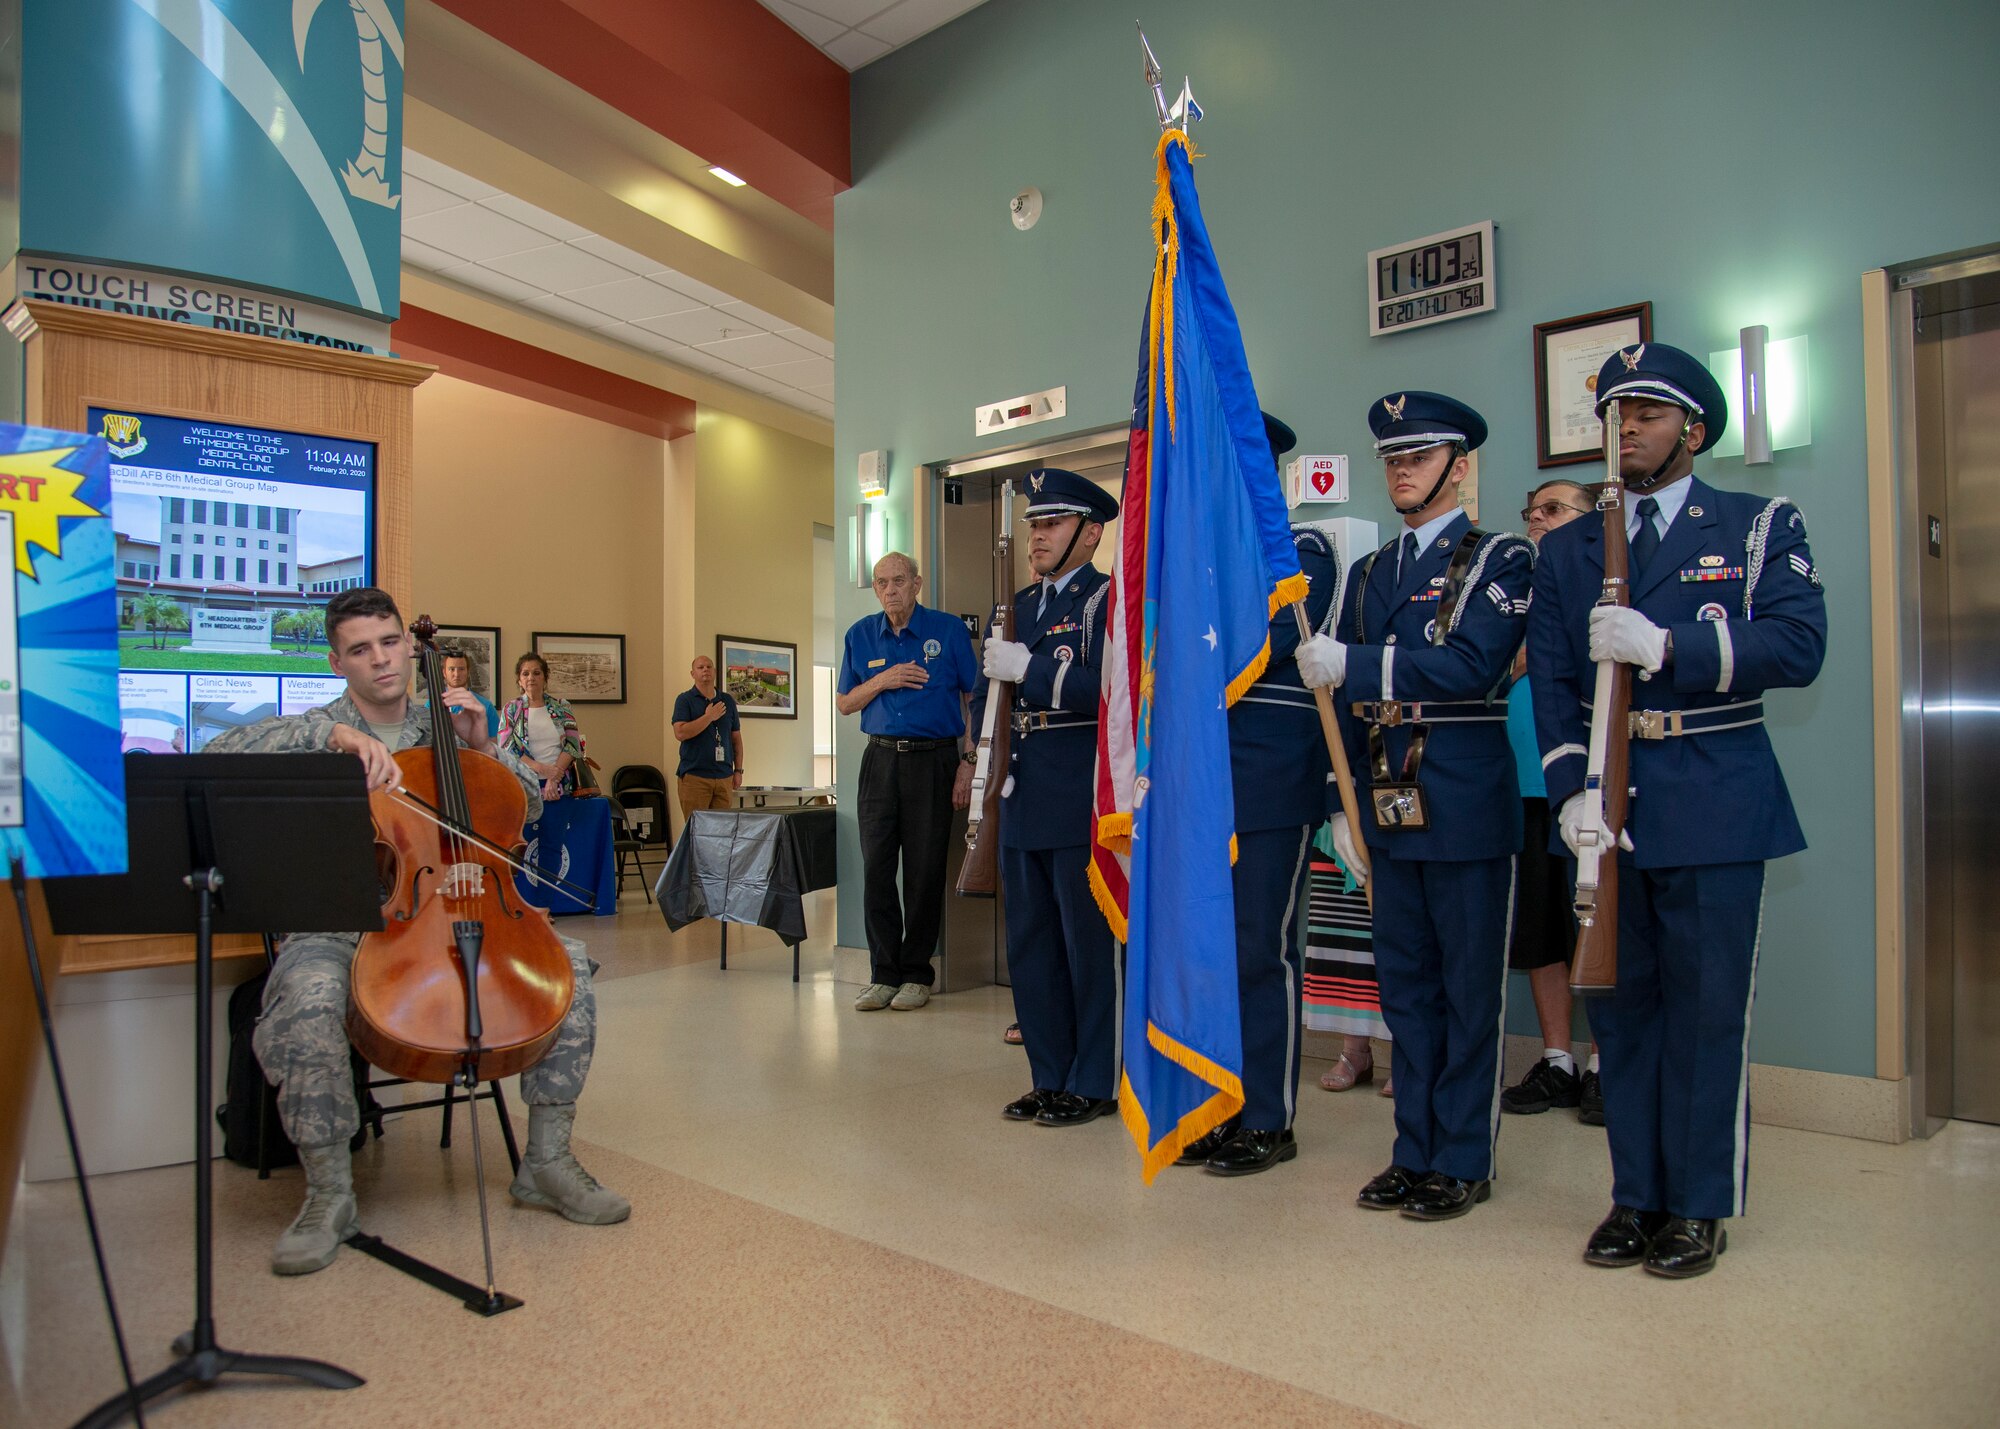 Airman 1st Class Jared N. Devine, a 6th Health Care Operations Squadron aerial medical technician, performs the national anthem on a cello during the annual Retiree Appreciation Day event, Feb. 22, 2020, at MacDill Air Force Base, Fla.